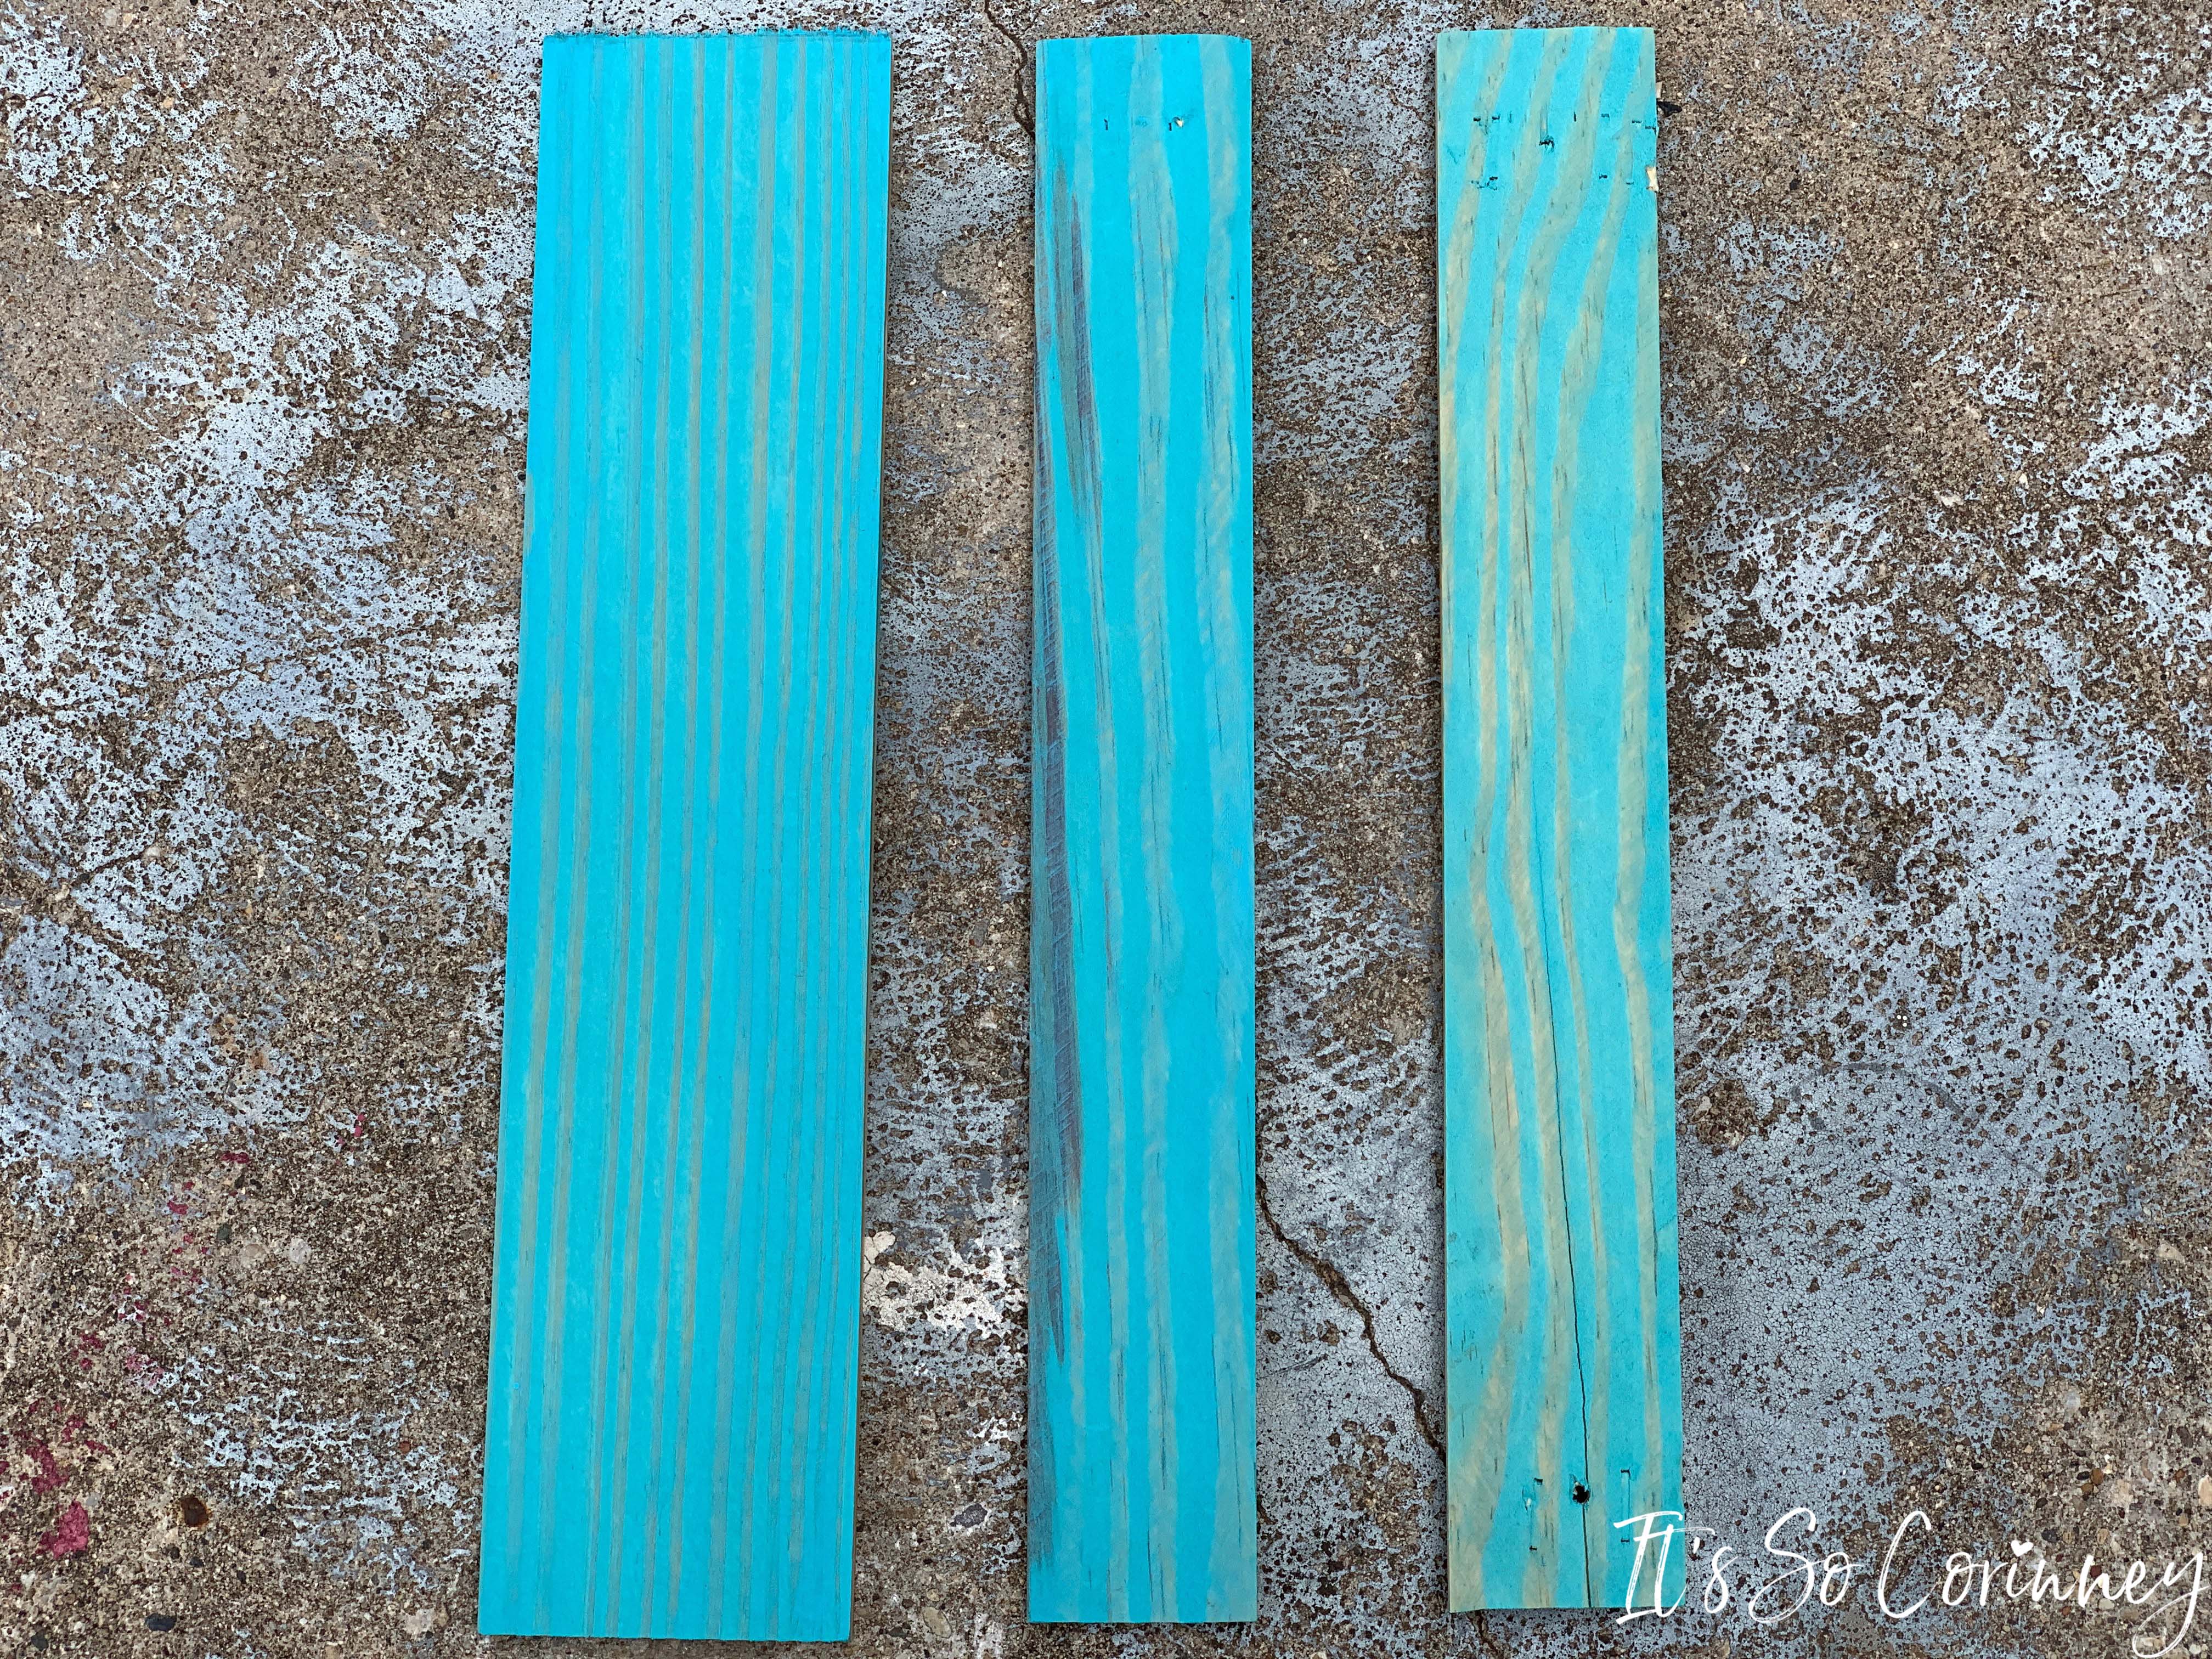 How to Make Colored Wood Stain with Regular Paint - It's So Corinney